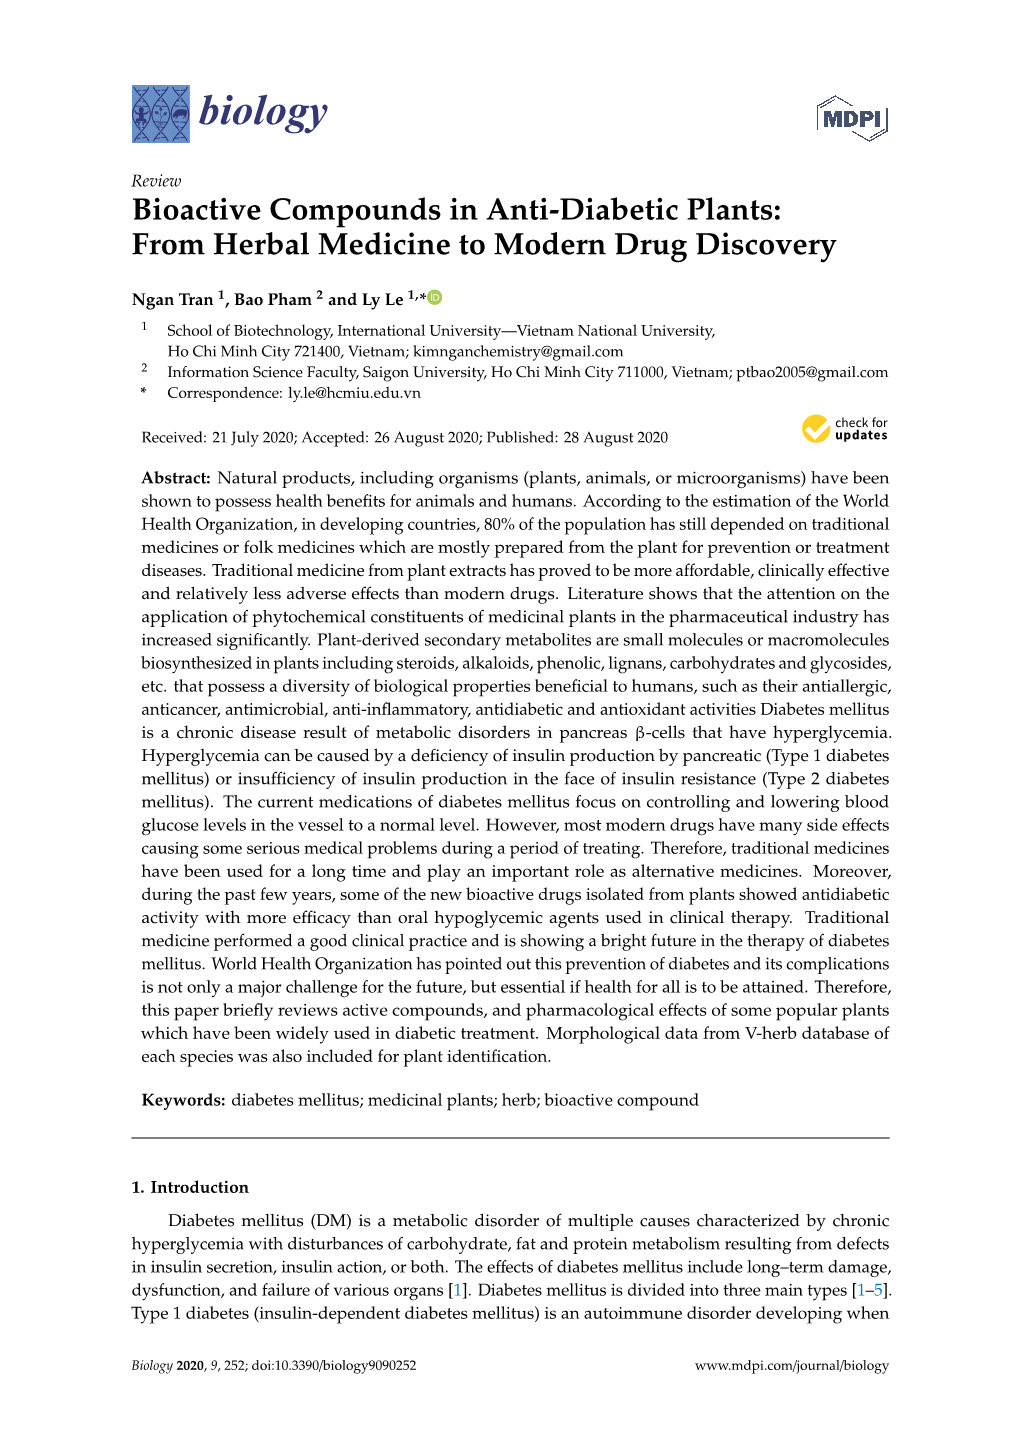 Bioactive Compounds in Anti-Diabetic Plants: from Herbal Medicine to Modern Drug Discovery